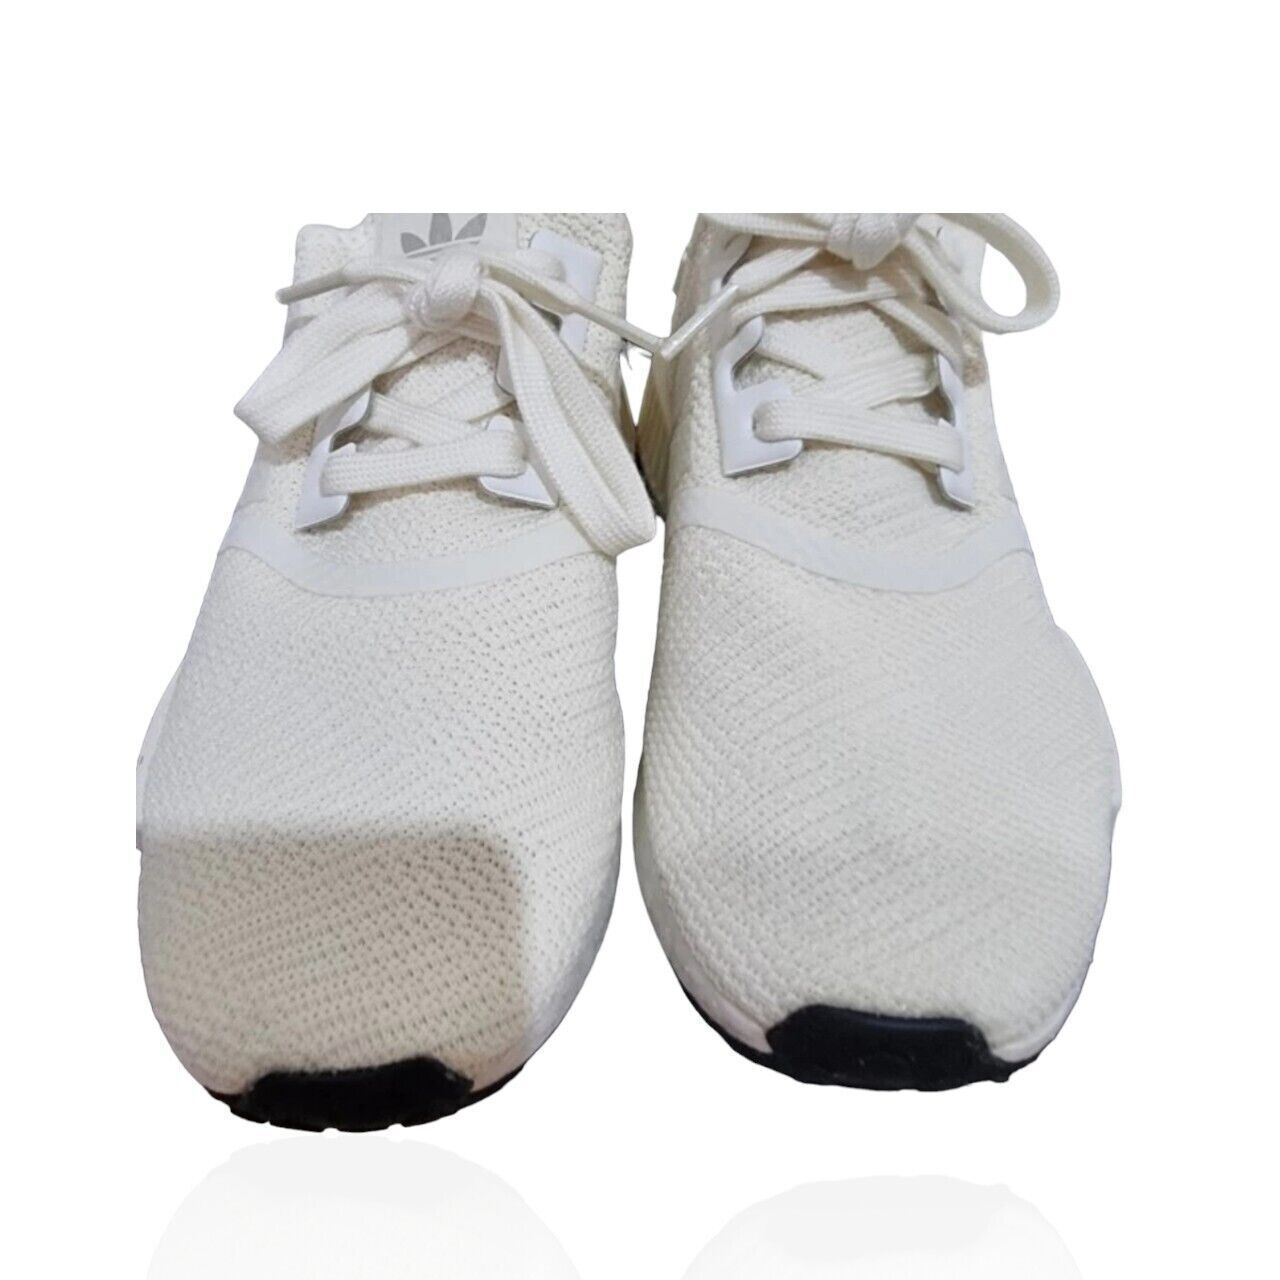 Adidas NMD R1 EE5174 Boost Off White Gold